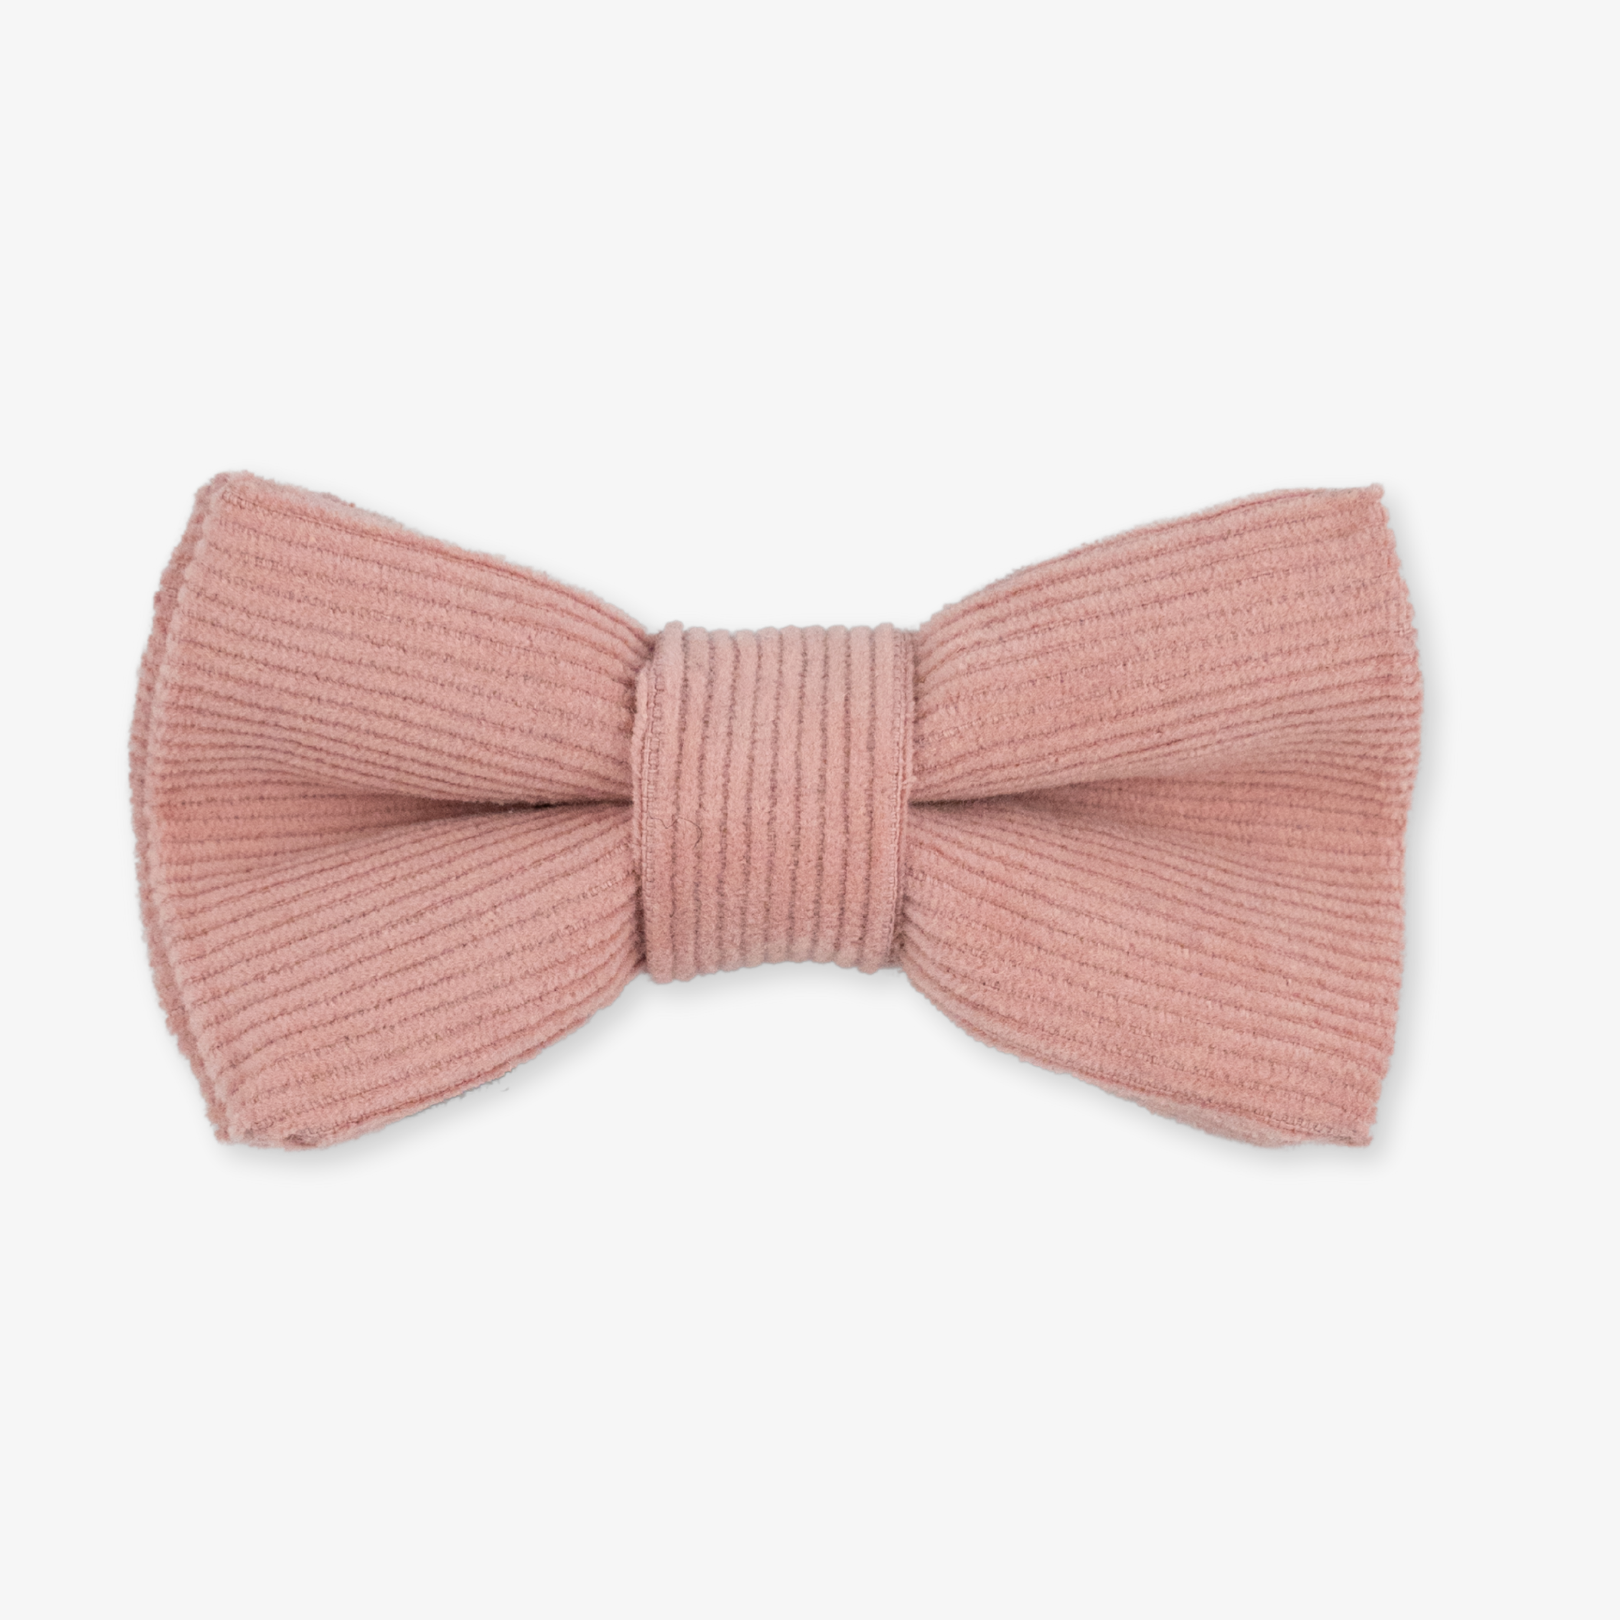 Rose Cord Dog Bow Tie